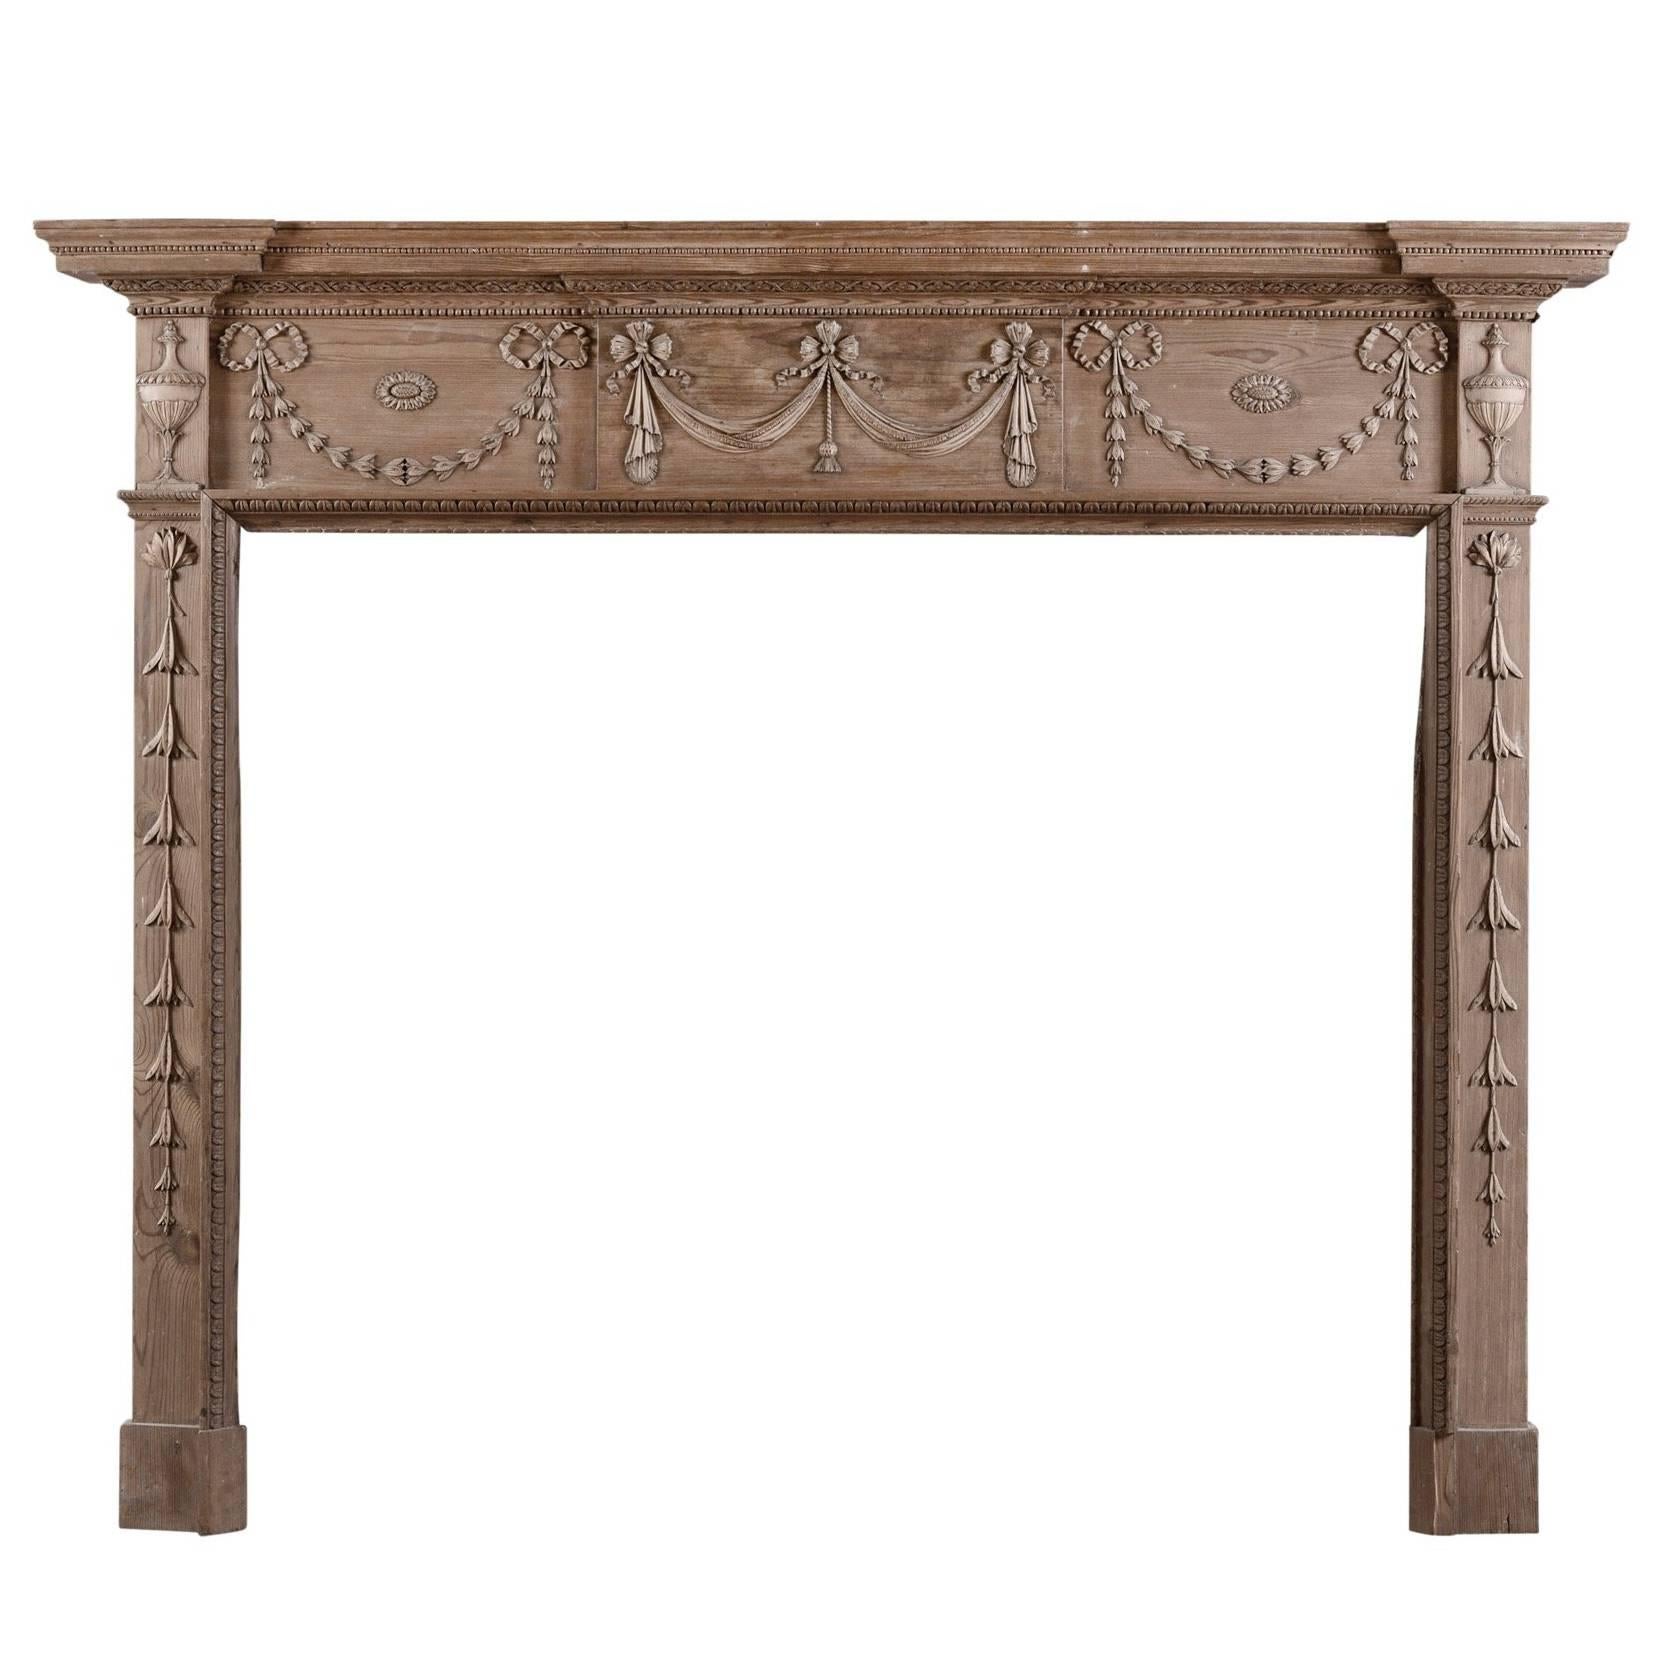 Carved Pine Fireplace in the Georgian Style